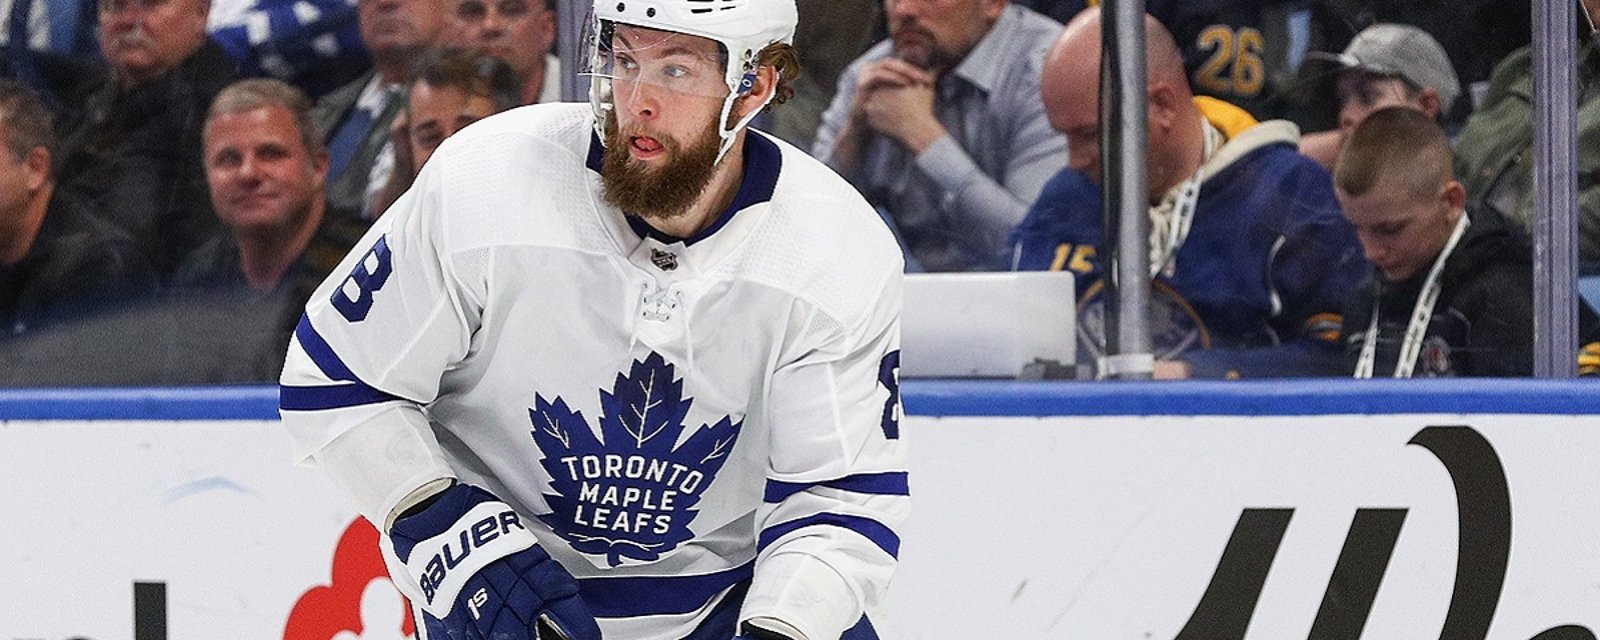 Sheldon Keefe drops a terrible update on Jake Muzzin just hours ahead of Game 7.